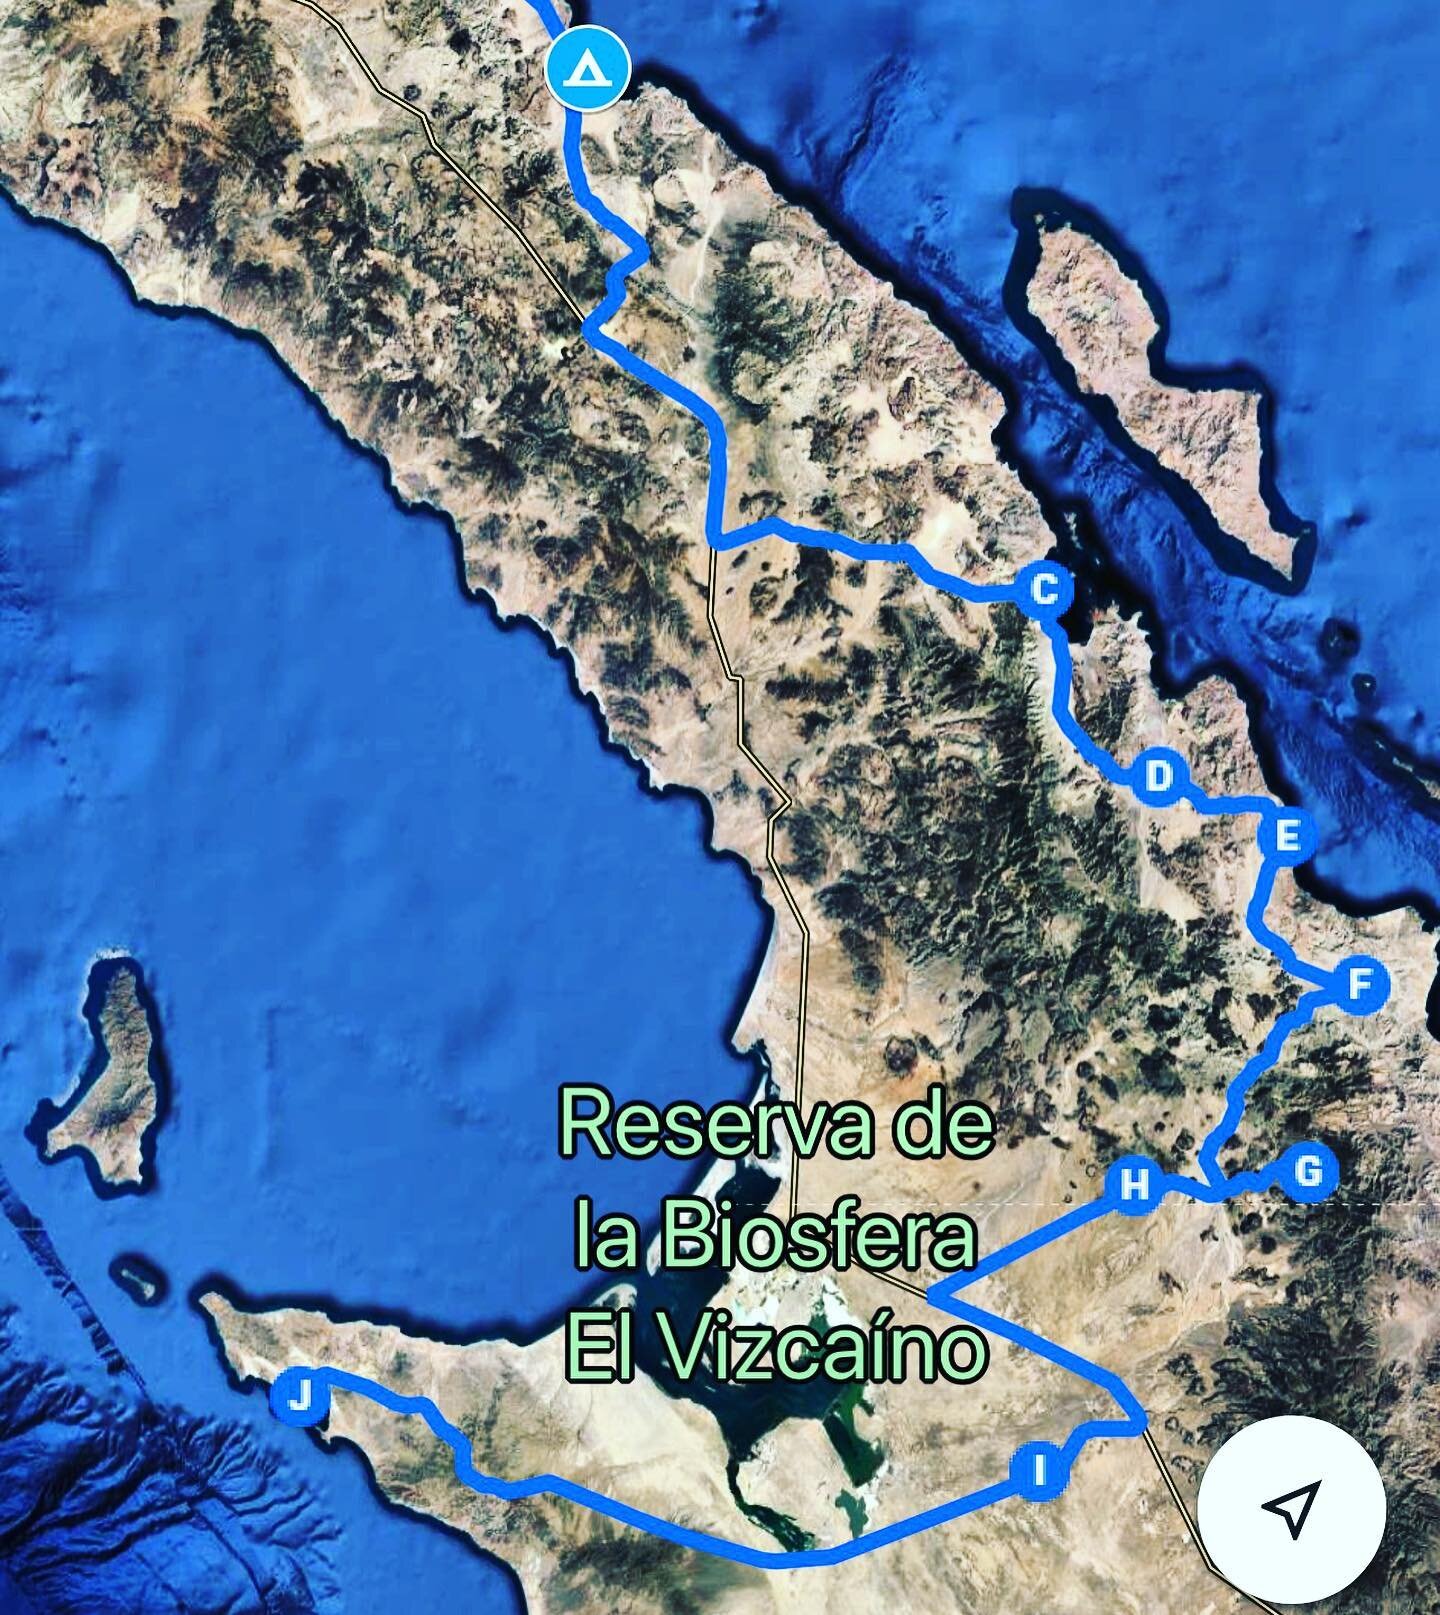 E, F, G, H 🔥 

Getting very stoked on this particular circuit (incomplete on map) as I think it checks all the boxes. Peninsular Bighorn Sheep (hopefully), ranches, nearshore islands, Jesuit missions, indigenous cave art, hiking, and maybe some surf